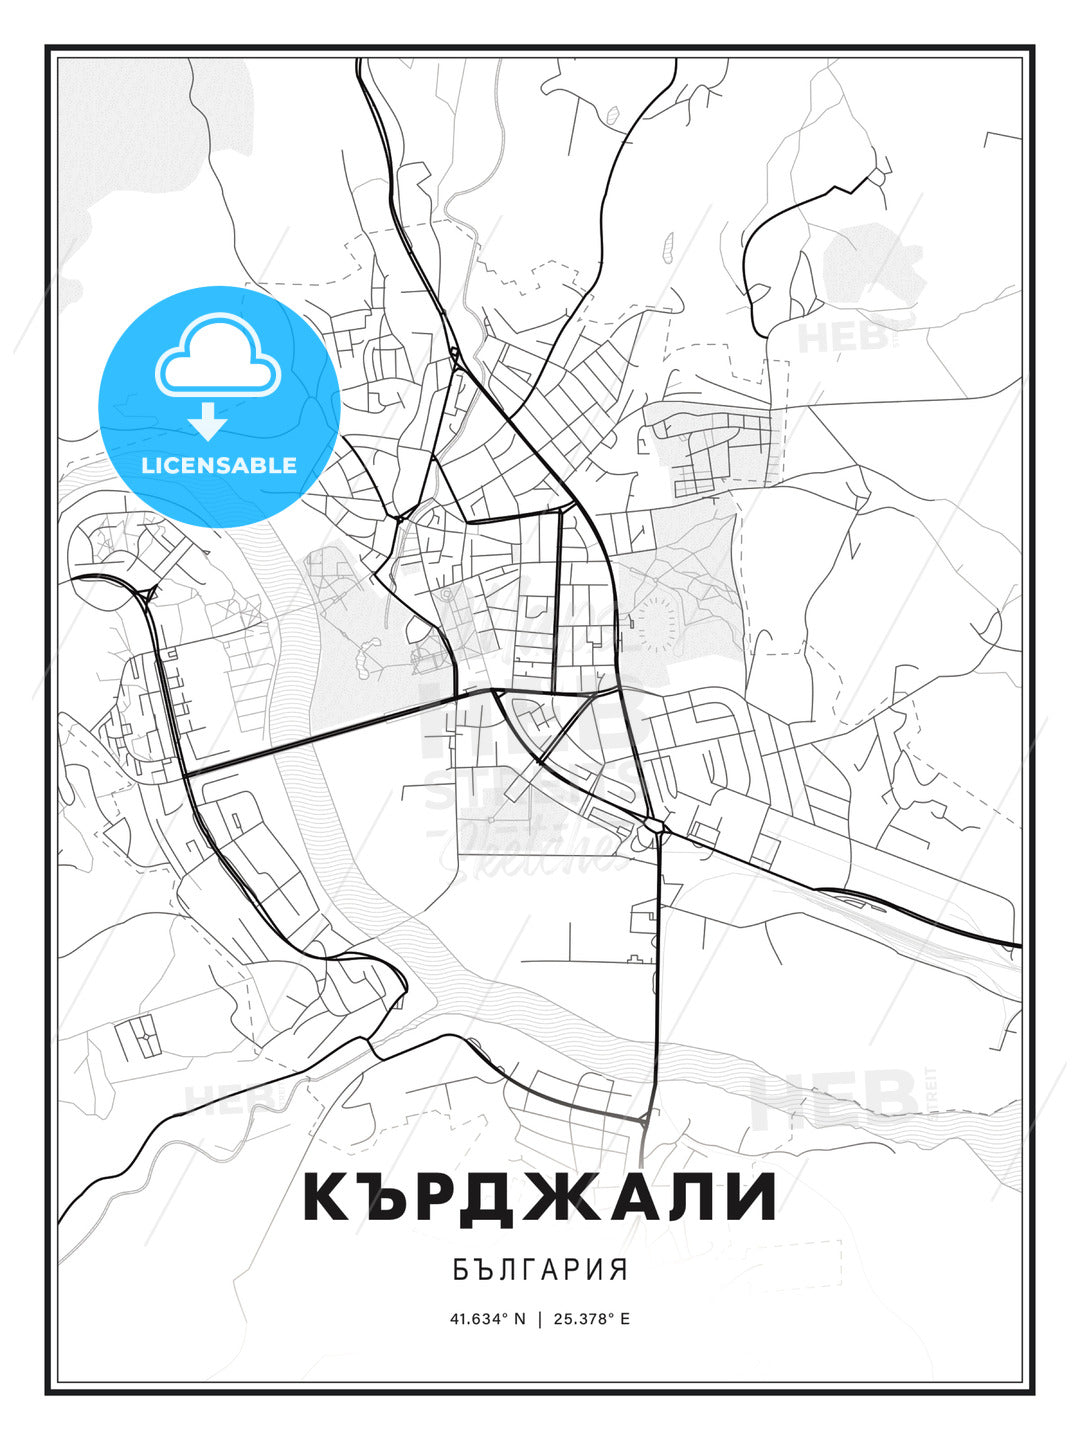 КЪРДЖАЛИ / Kardzhali, Bulgaria, Modern Print Template in Various Formats - HEBSTREITS Sketches